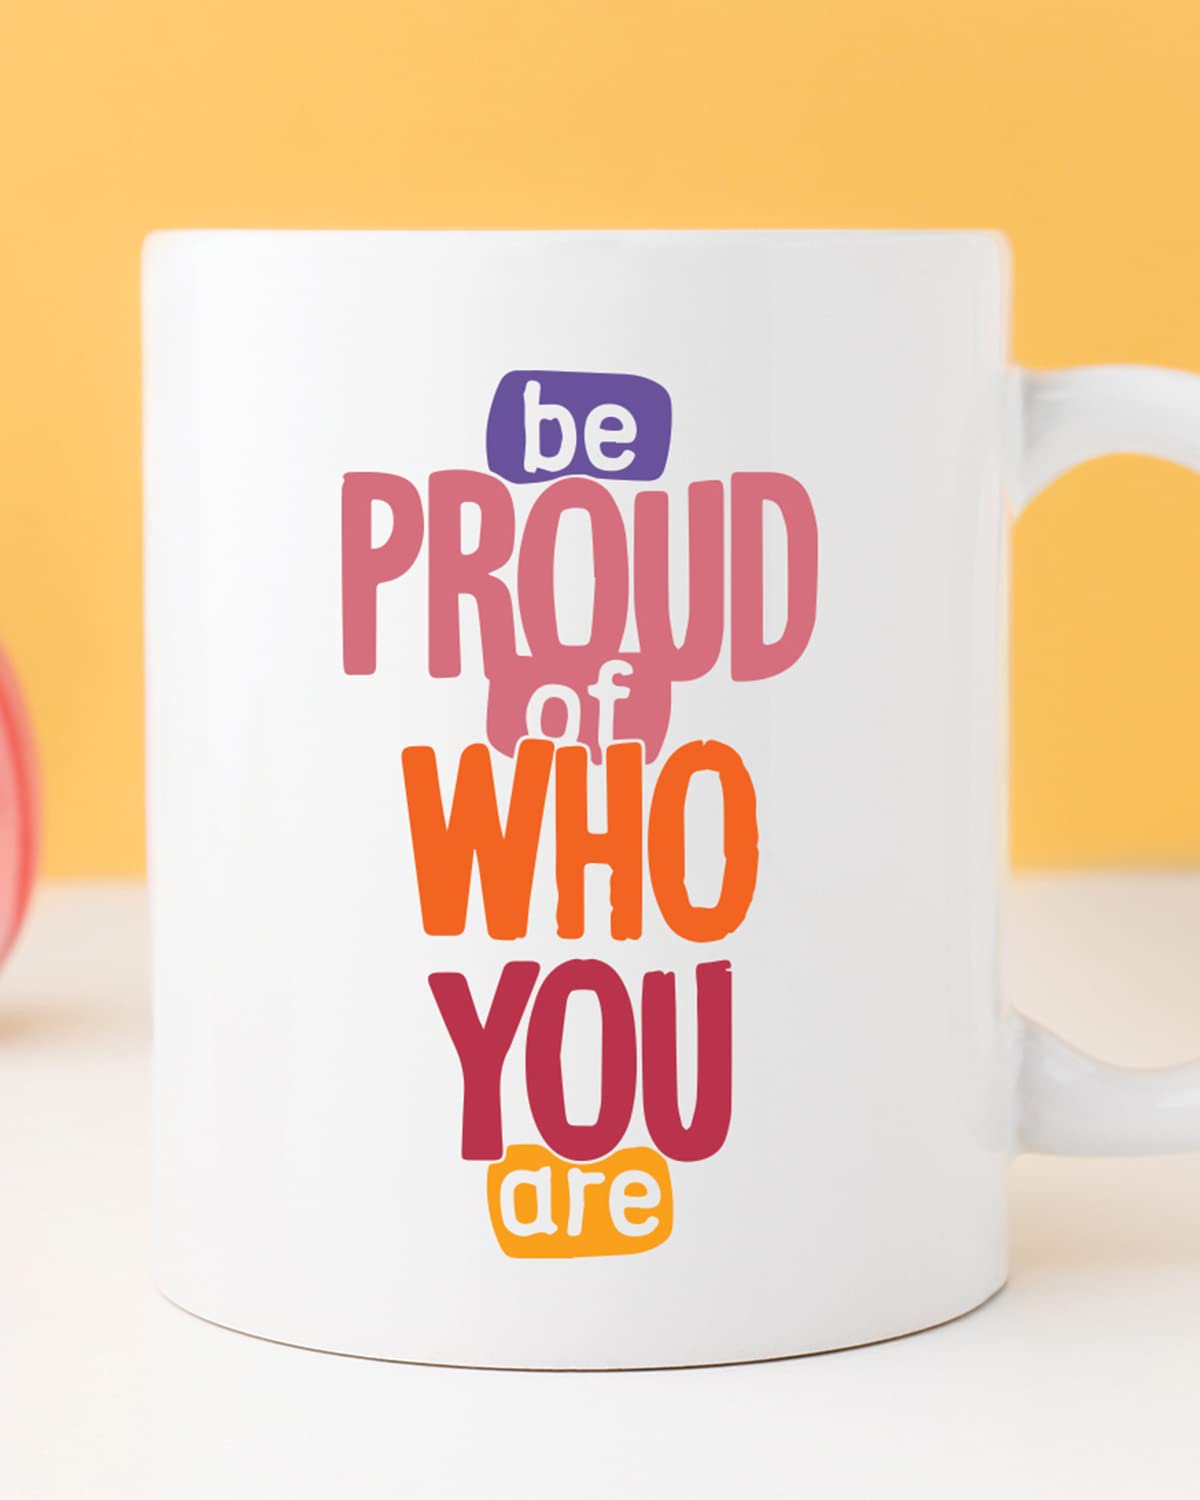 BE Proud of WHO You are Coffee Mug - Gift for Friend, Birthday Gift, Birthday Mug, Motivational Quotes Mug, Mugs with Funny & Funky Dialogues, Bollywood Mugs, Funny Mugs for Him & Her